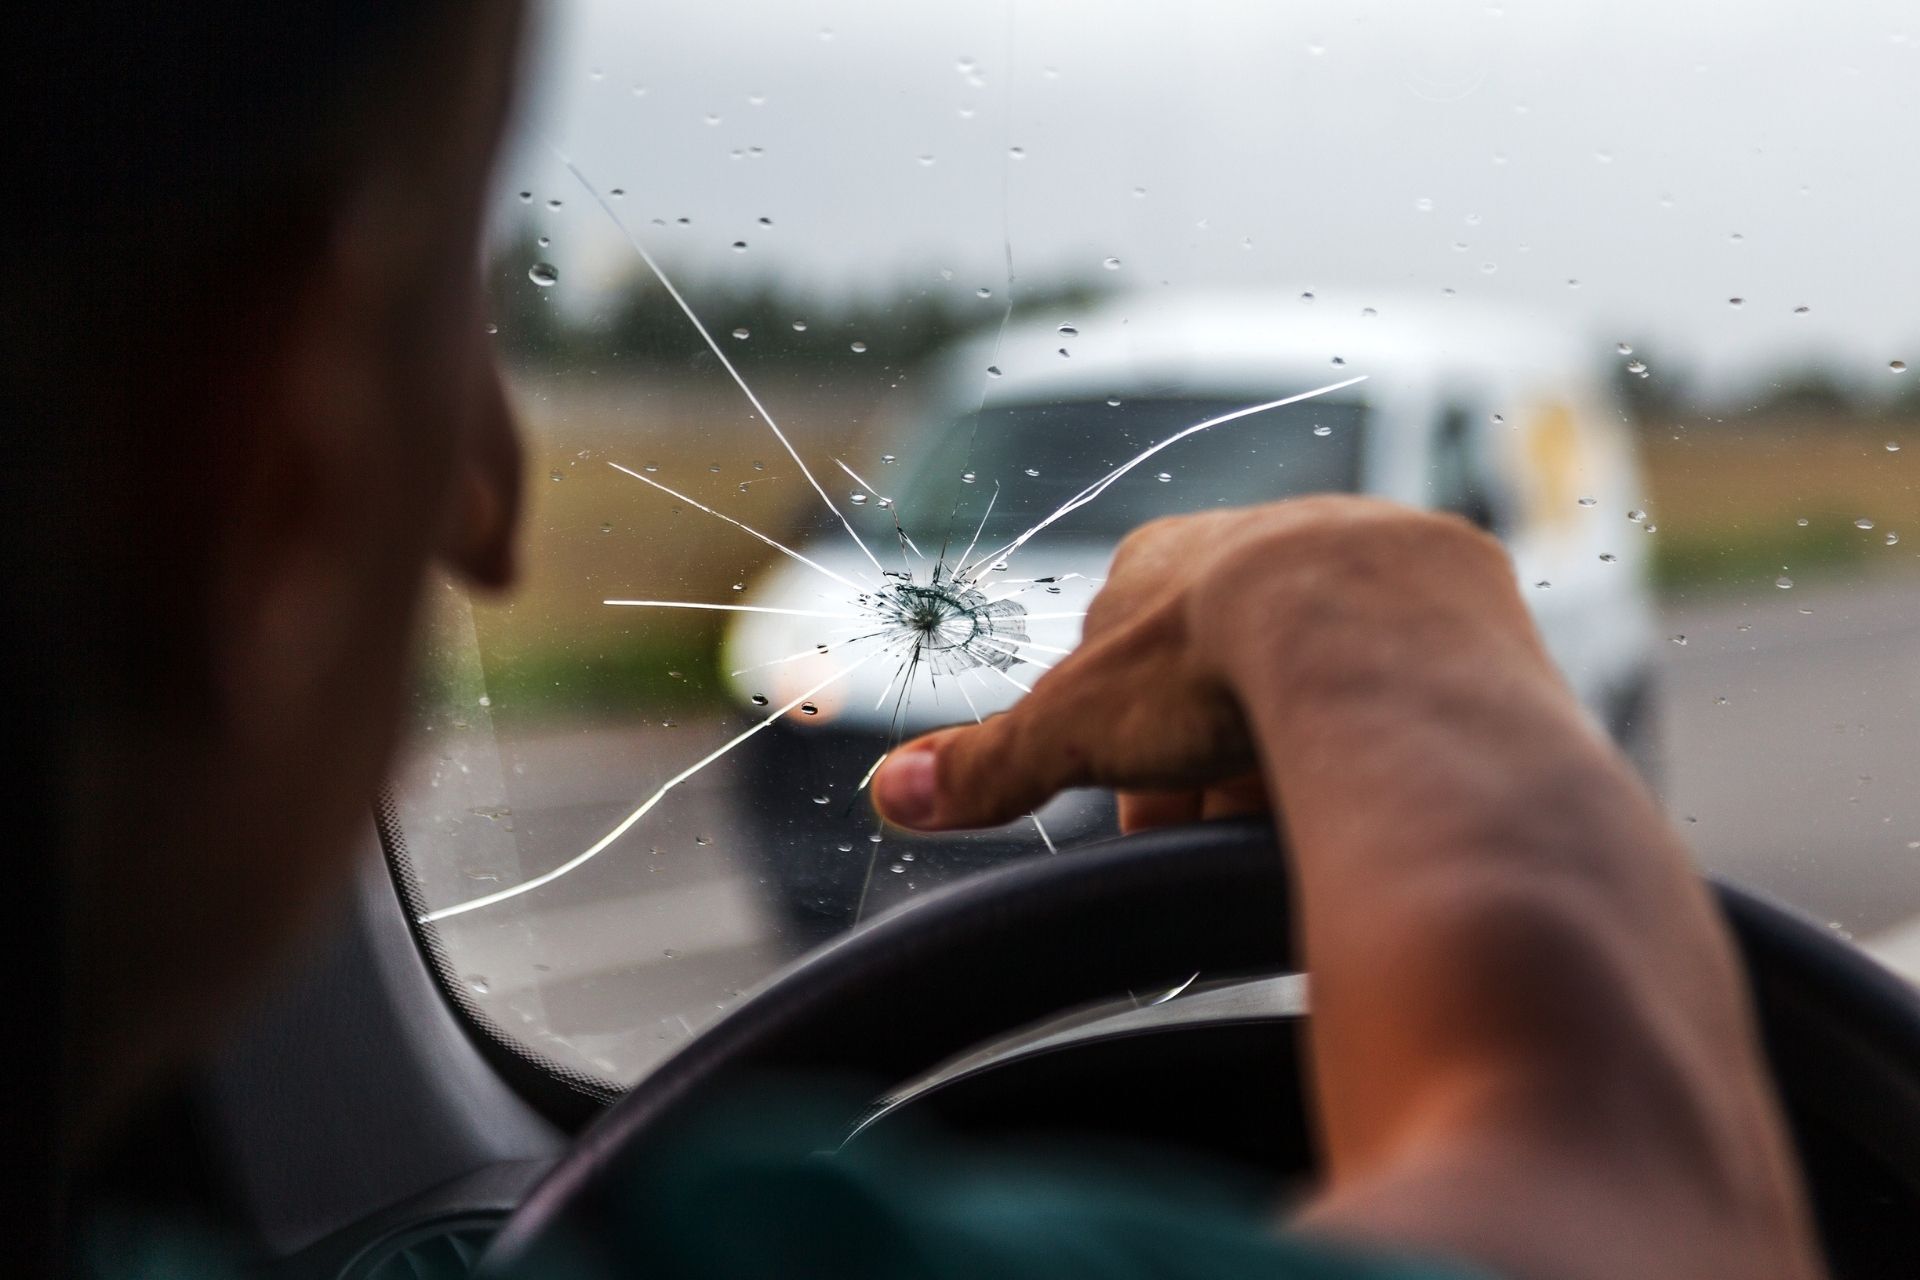 How Long Can You Drive With a Cracked Windshield?